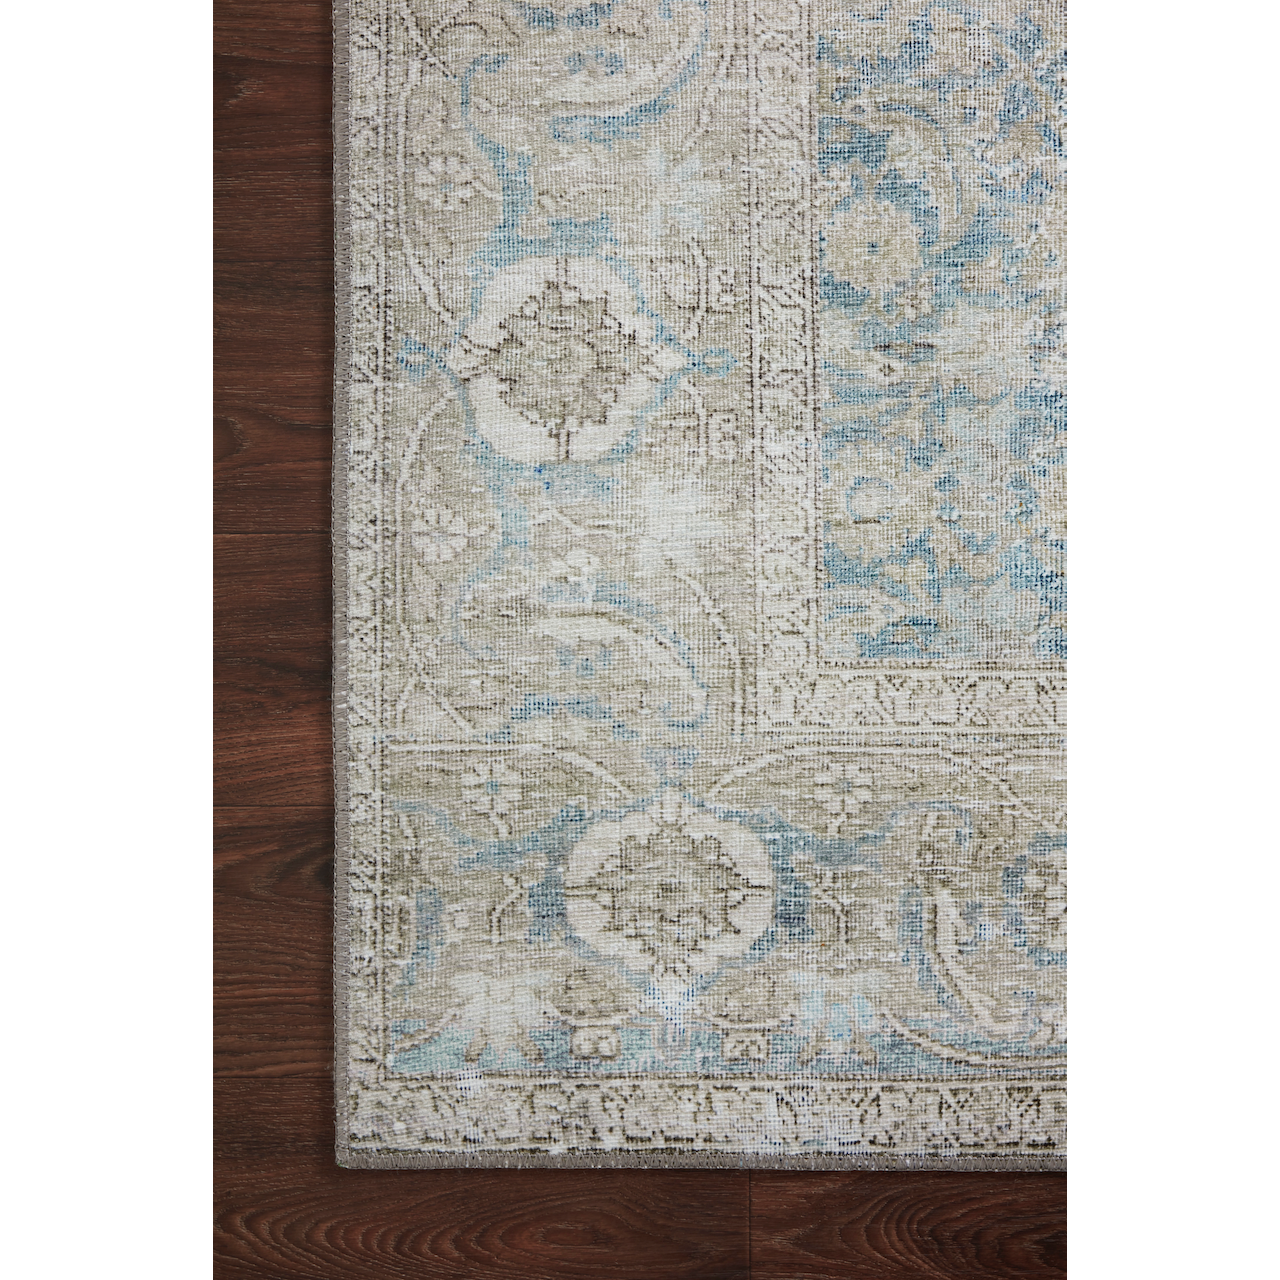 Power-loomed of 100% polyester, the Wynter Ocean / Silver WYN-10 area rug from Loloi showcases a one-of-a-kind vintage or antique area rug look at an affordable price. The rug is ideal for high traffic areas due to the rug's durability making it perfect for living rooms, dining rooms, kitchens, hallways, entryways. Amethyst Home provides interior design, new construction, custom furniture, and rugs for the Younkers and New York metro area.